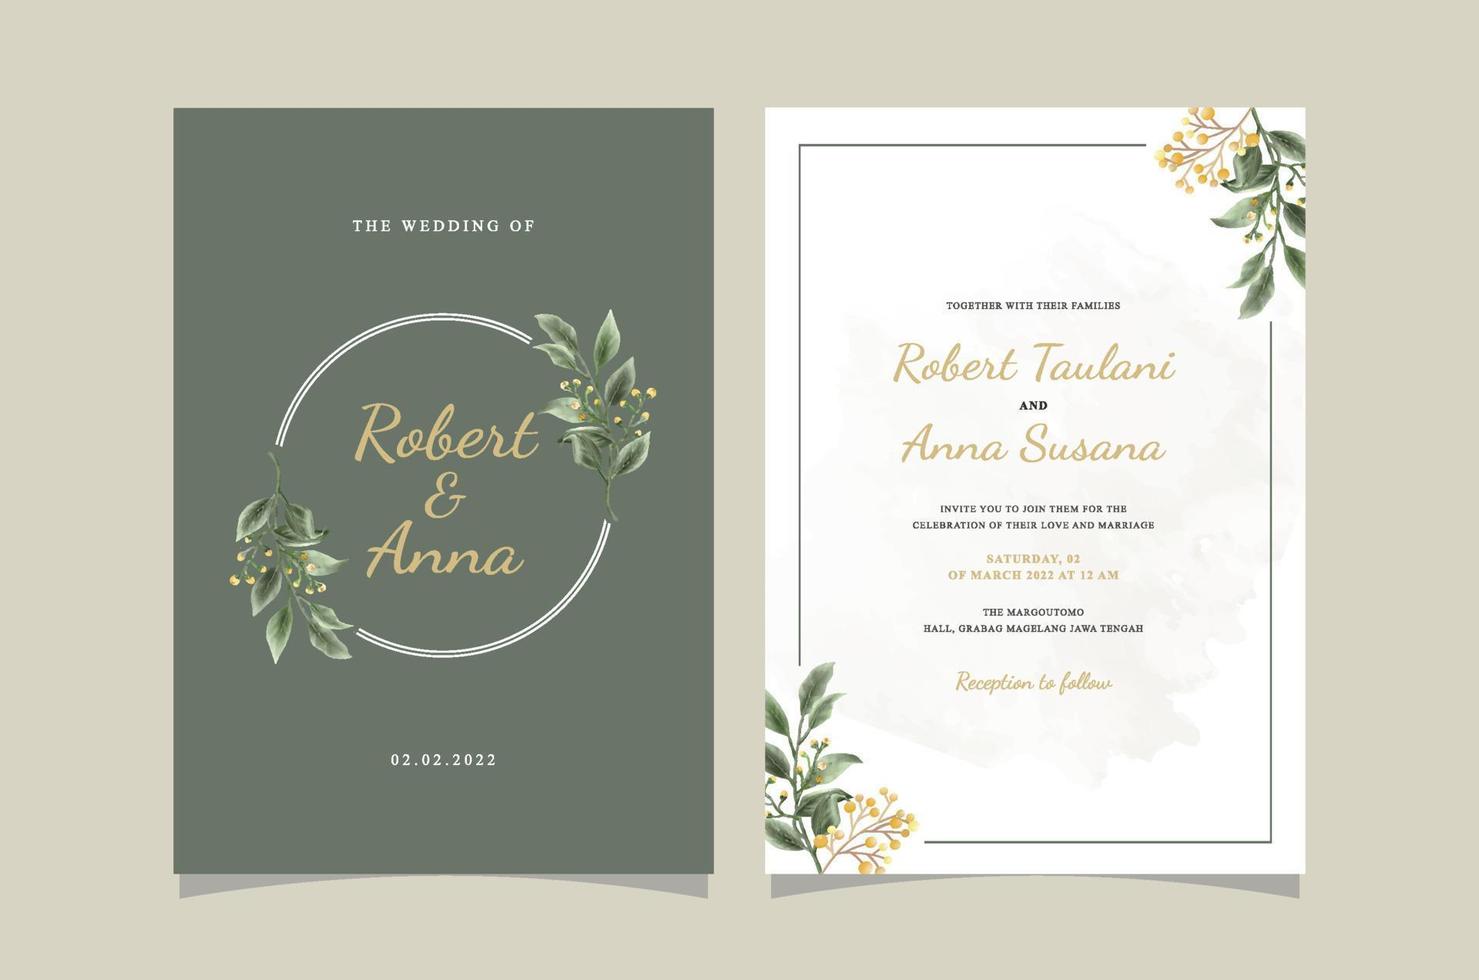 Greenery floral wedding invitation card template vector